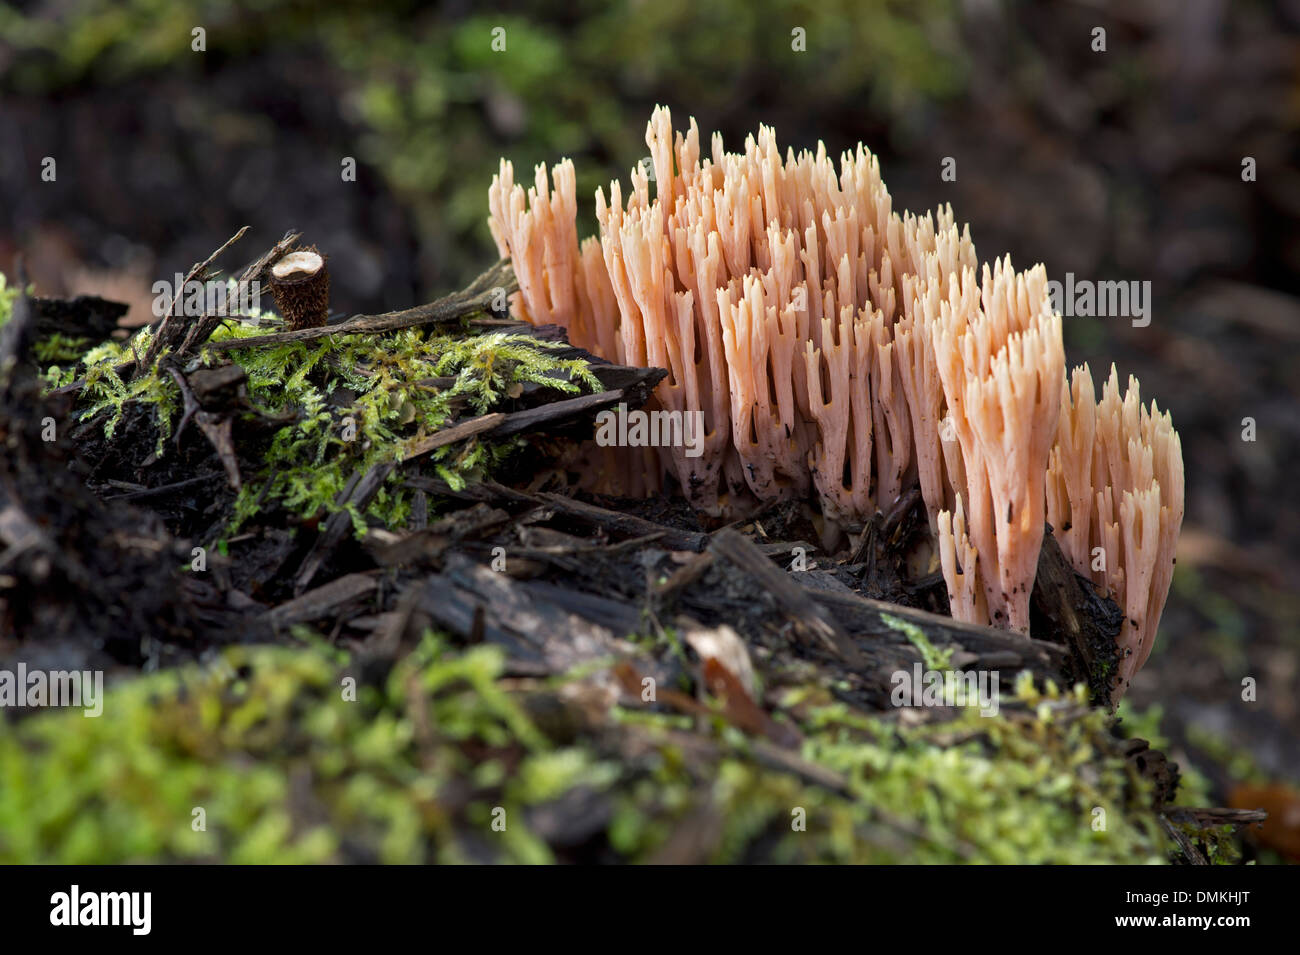 Strict-branch coral fungus (Ramaria stricta), inedible, Ramariaceae family, Switzerland Stock Photo